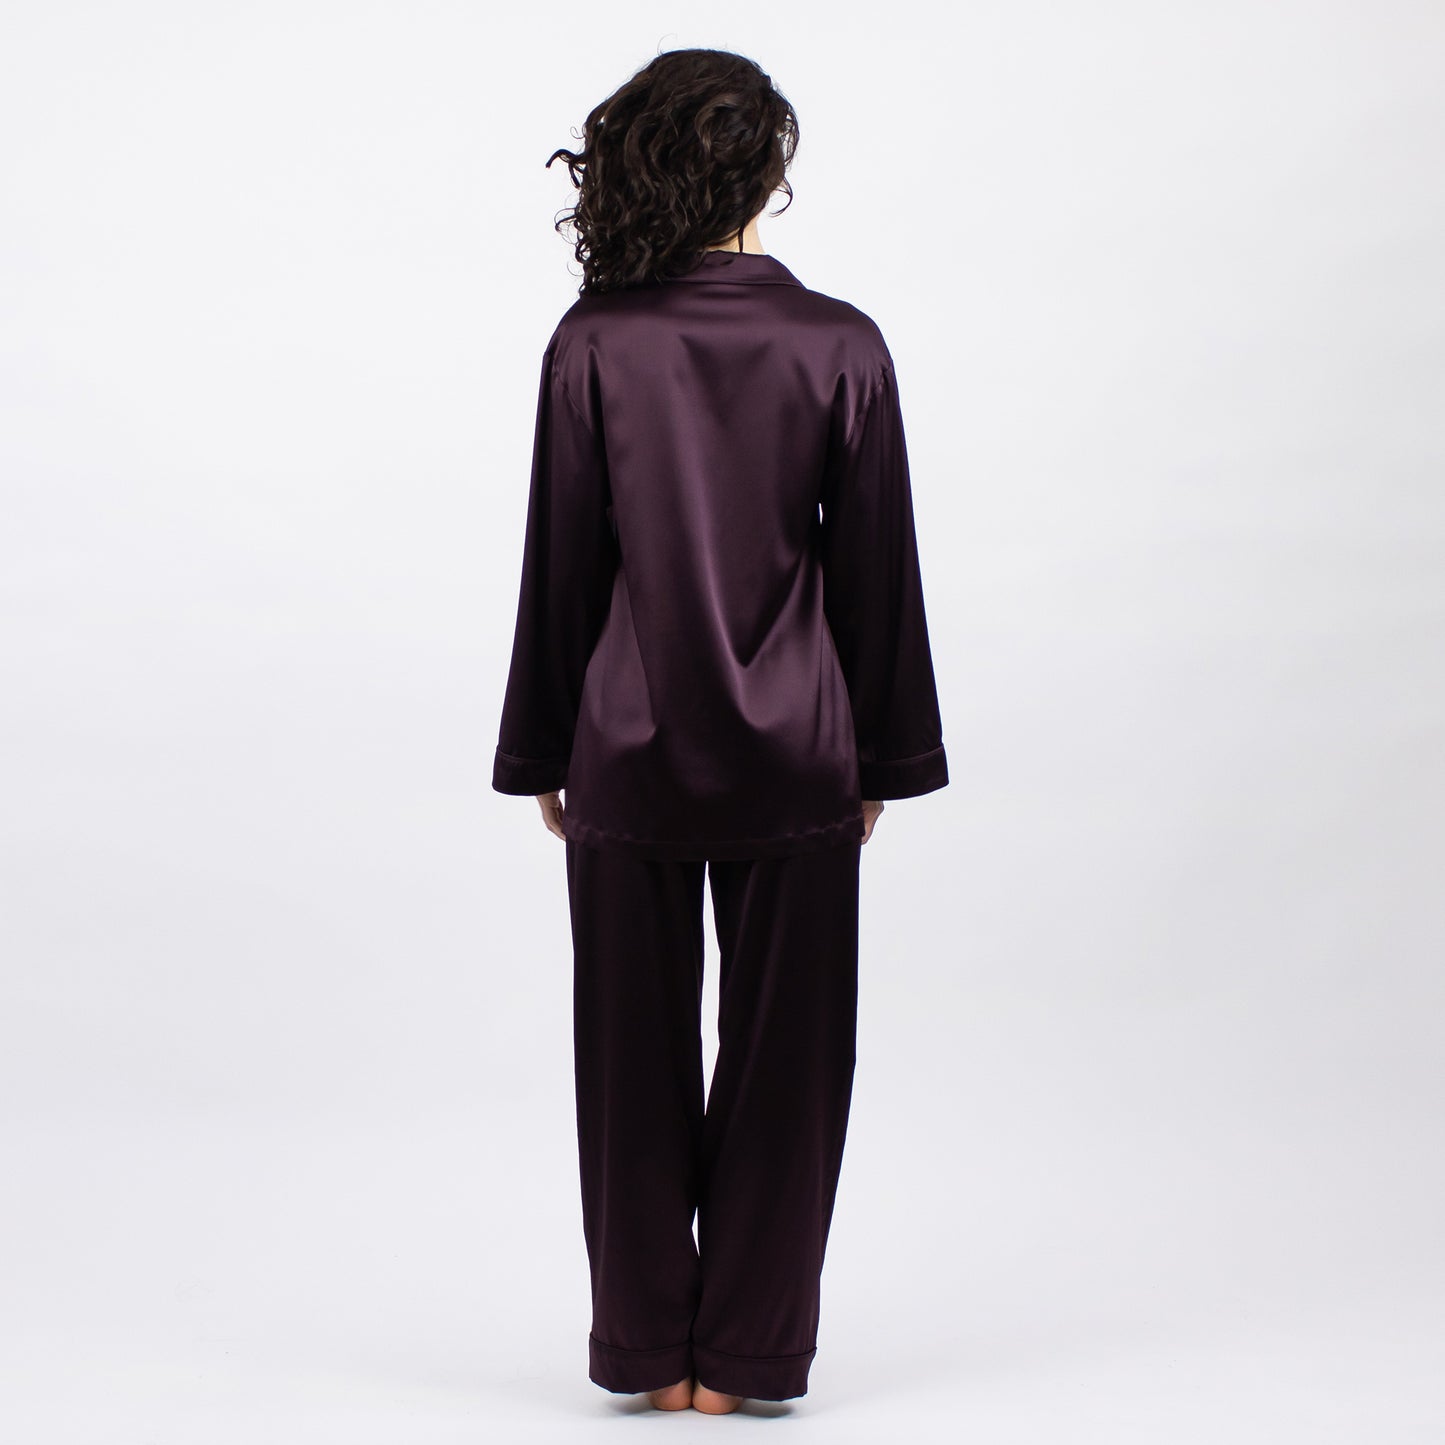 Nokaya The Lady silky pants from NOKAYA. Features a relaxed straight cut for night-long comfort.